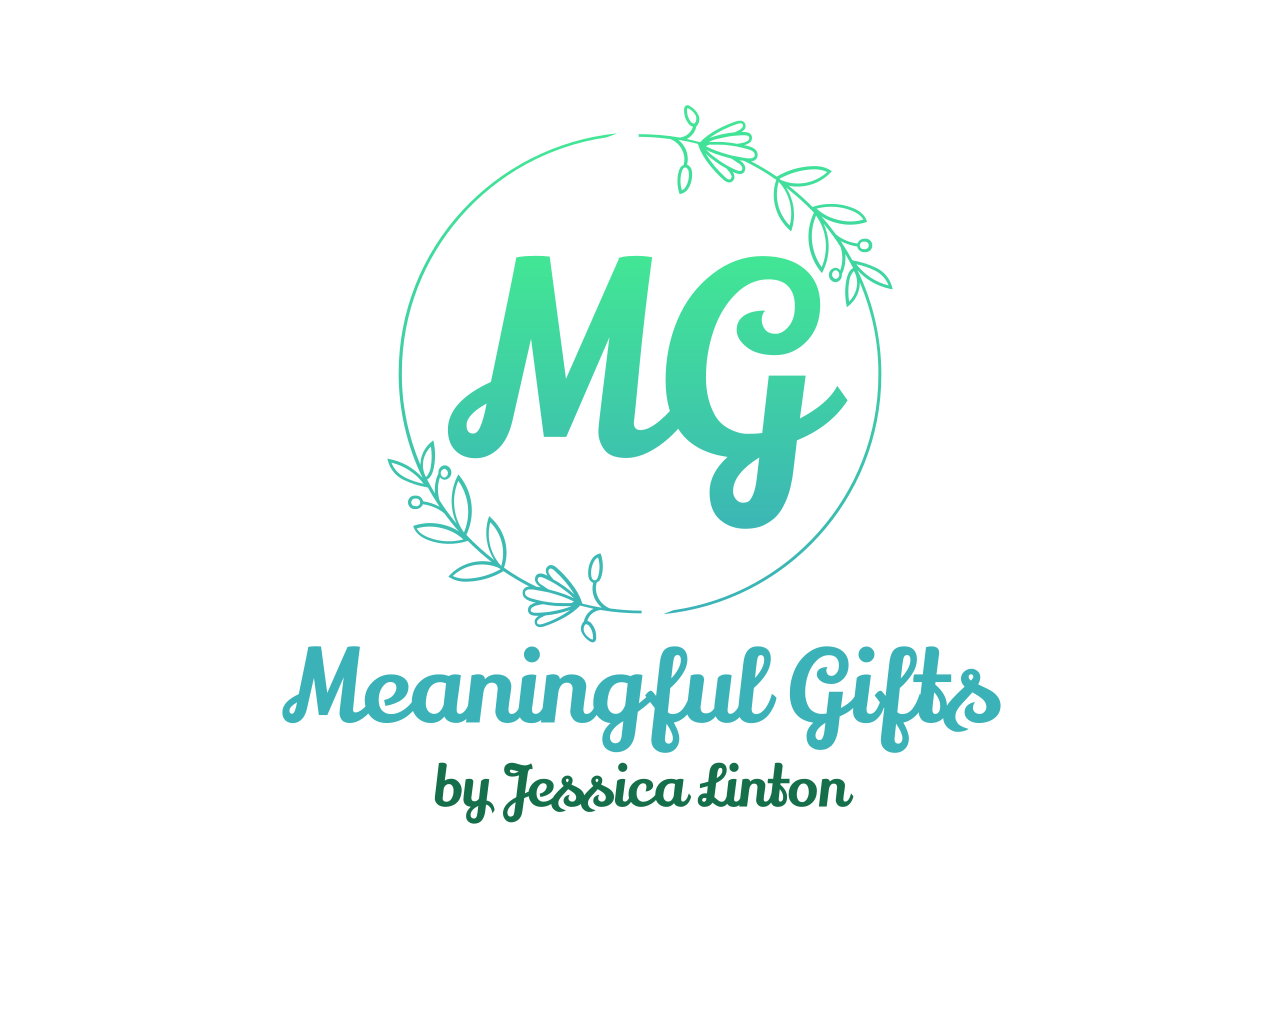 Meaningfulgifts1